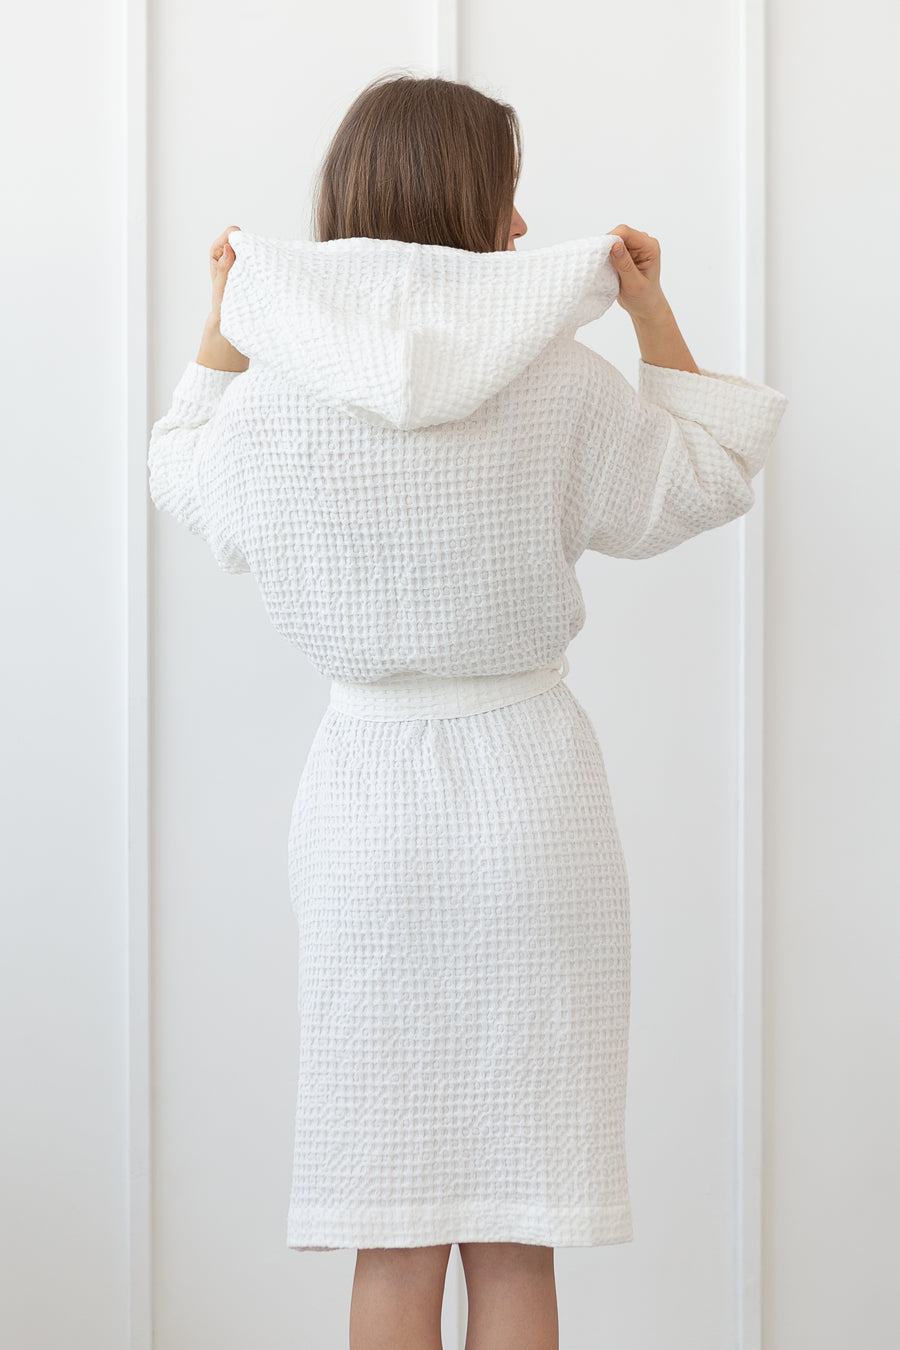 Waffle Linen Bathrobe with Hoodie in White - Linen Couture Boutique